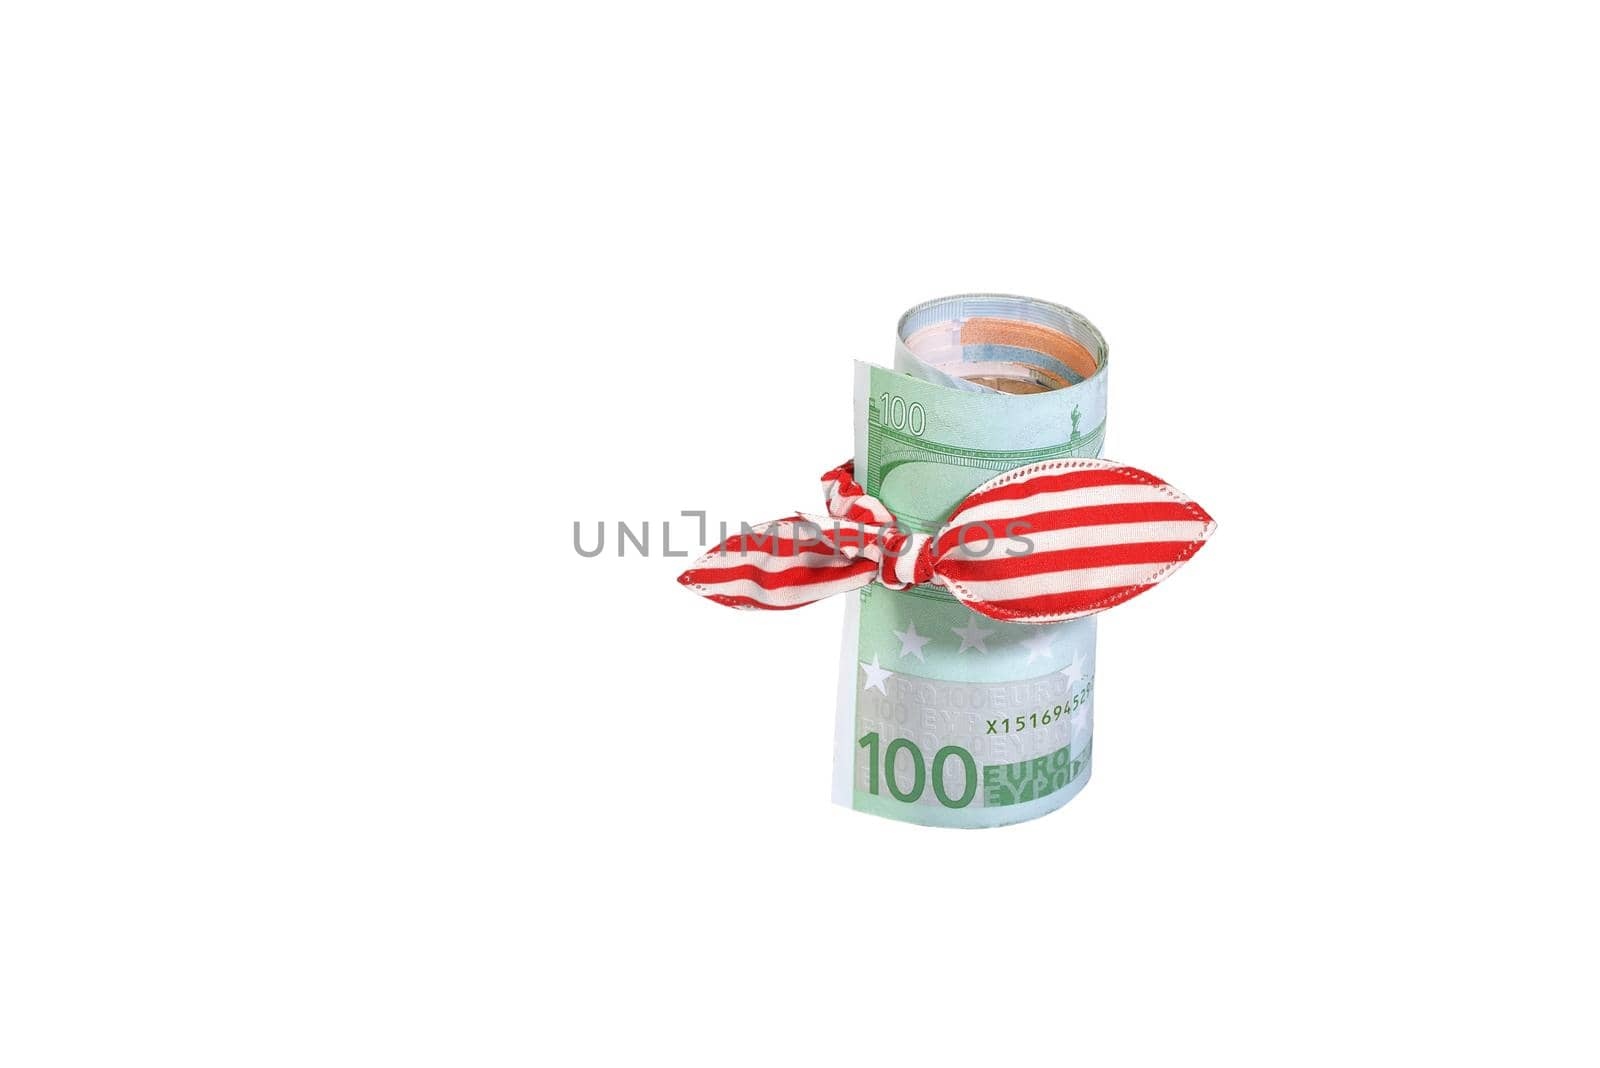 Hundred euros banknote curtailed by a tubule with red bow by Estival